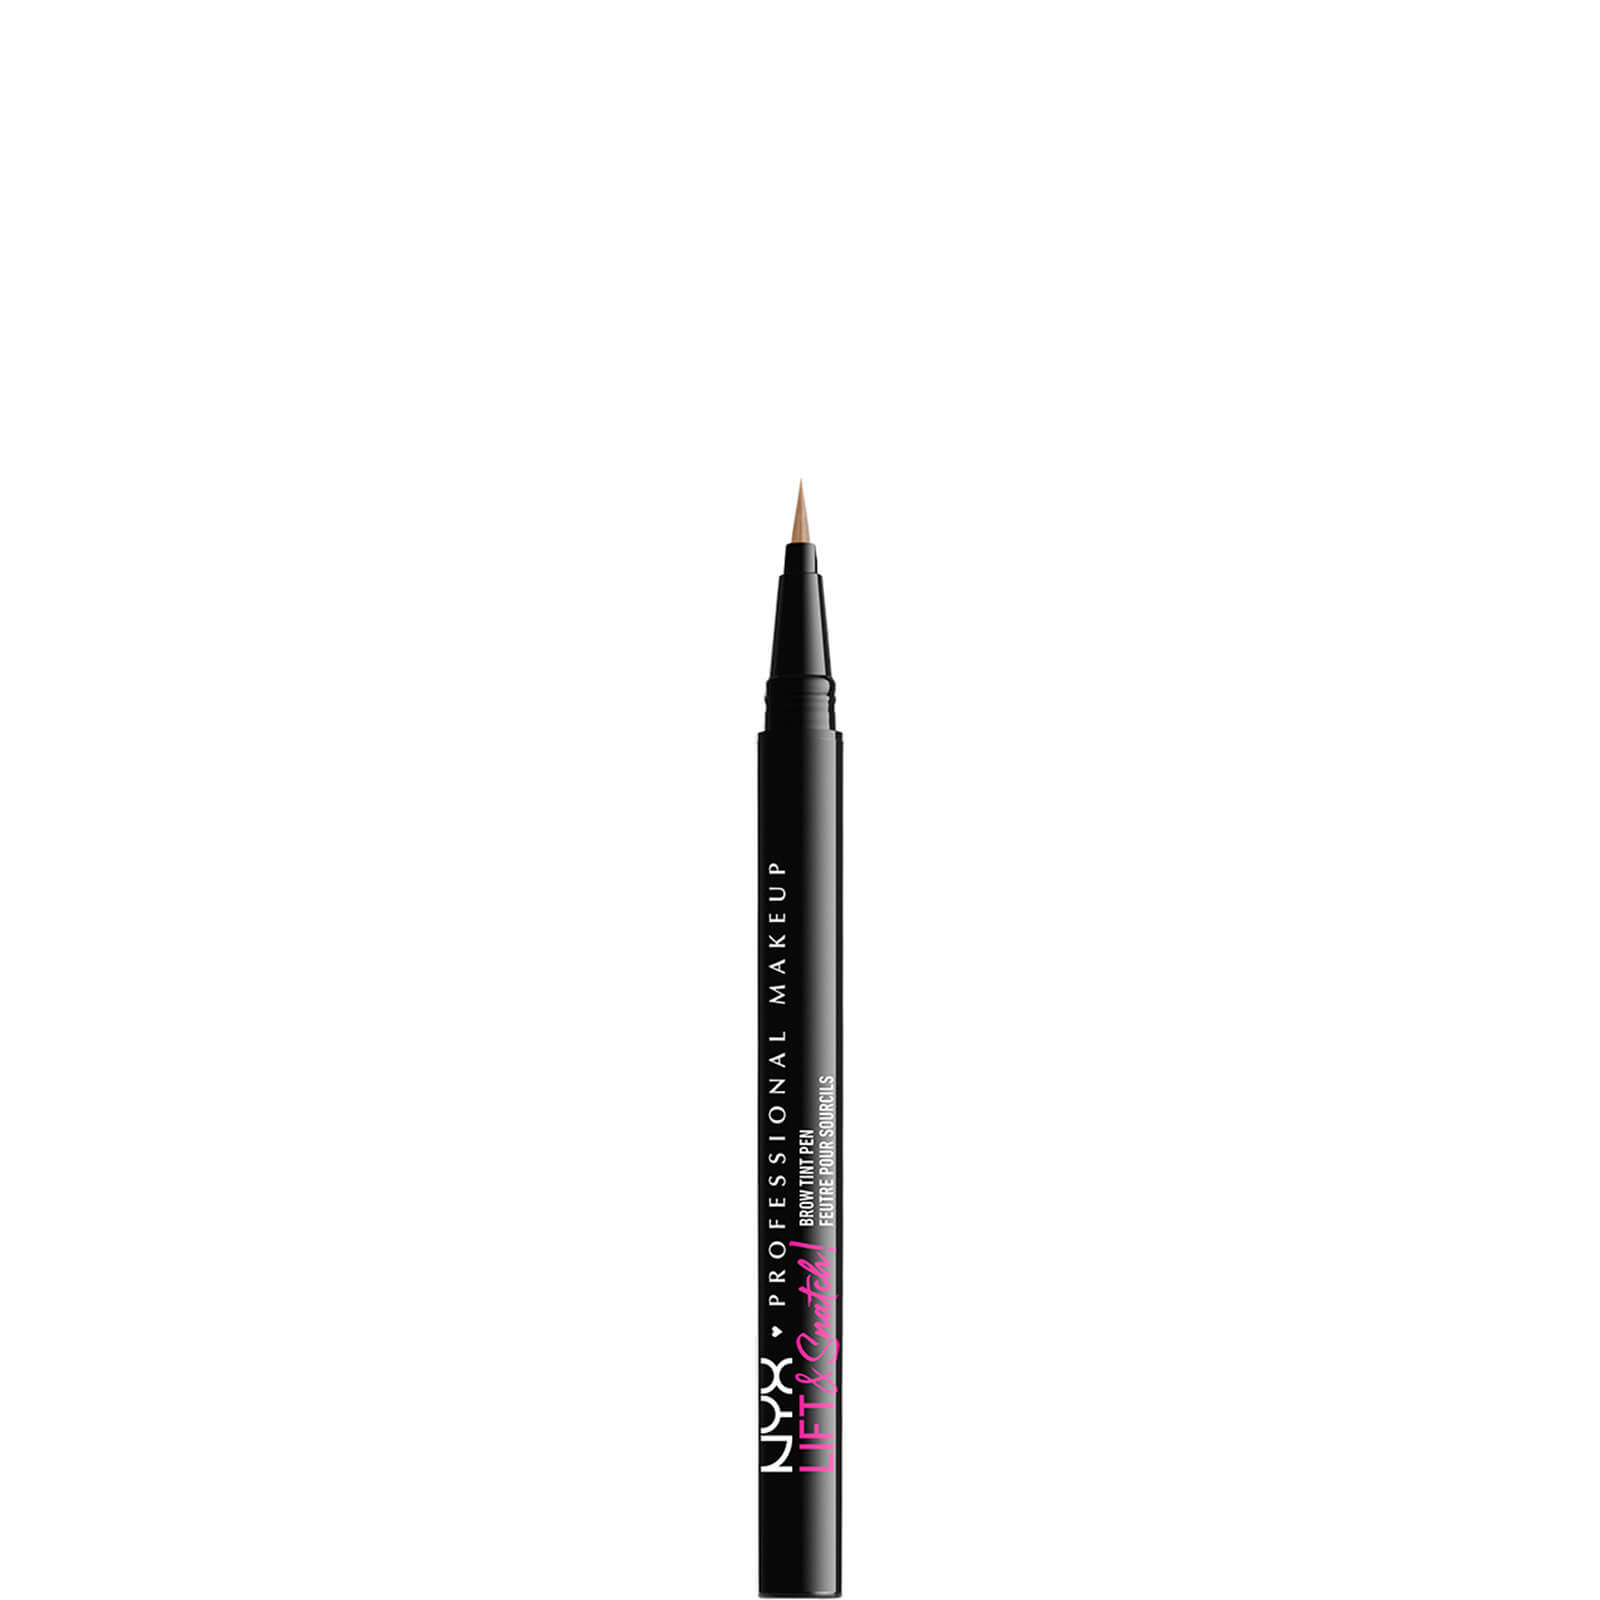 NYX Professional Makeup Lift and Snatch Brow Tint Pen 3g (Various Shades) - Taupe